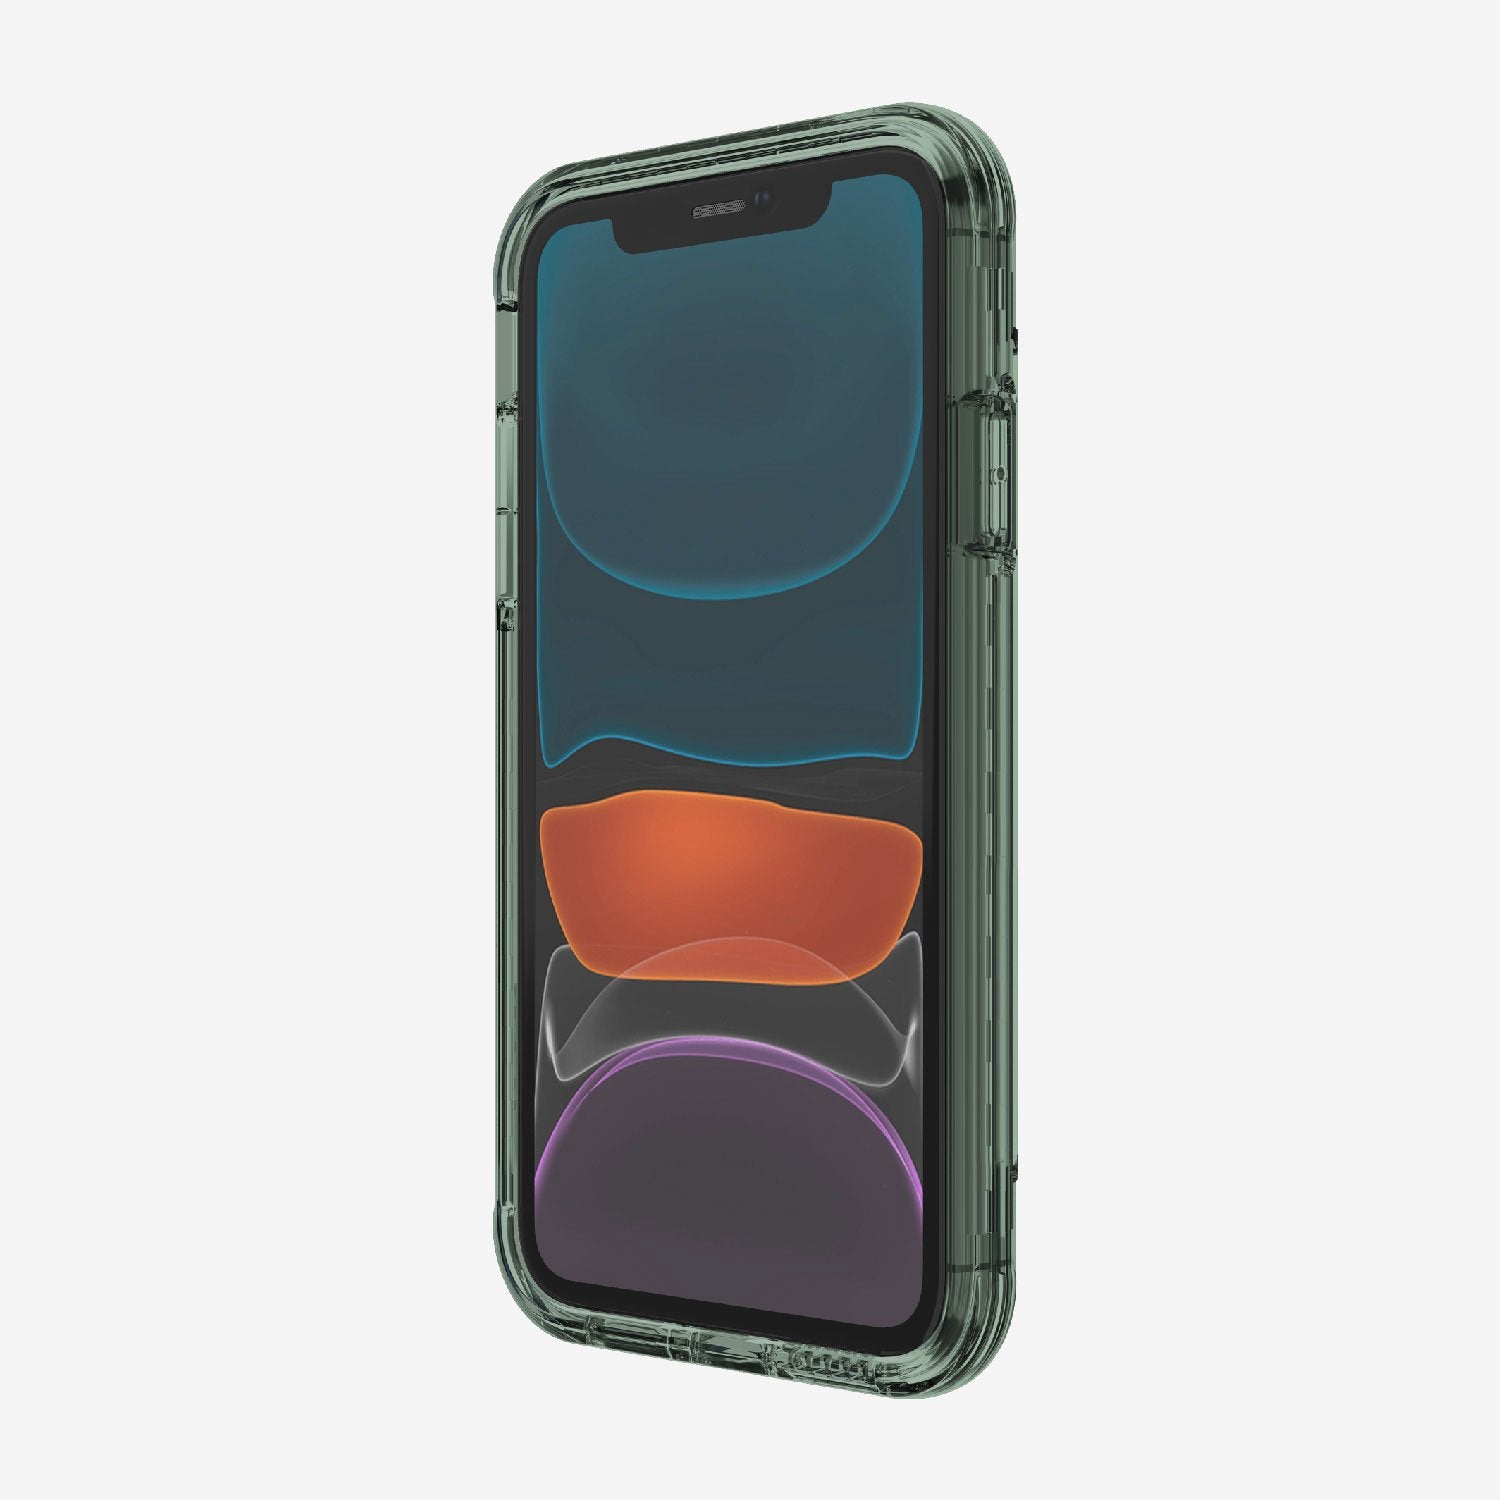 The wireless charging feature of Raptic Air in an iPhone 11 Case - AIR, available in green.